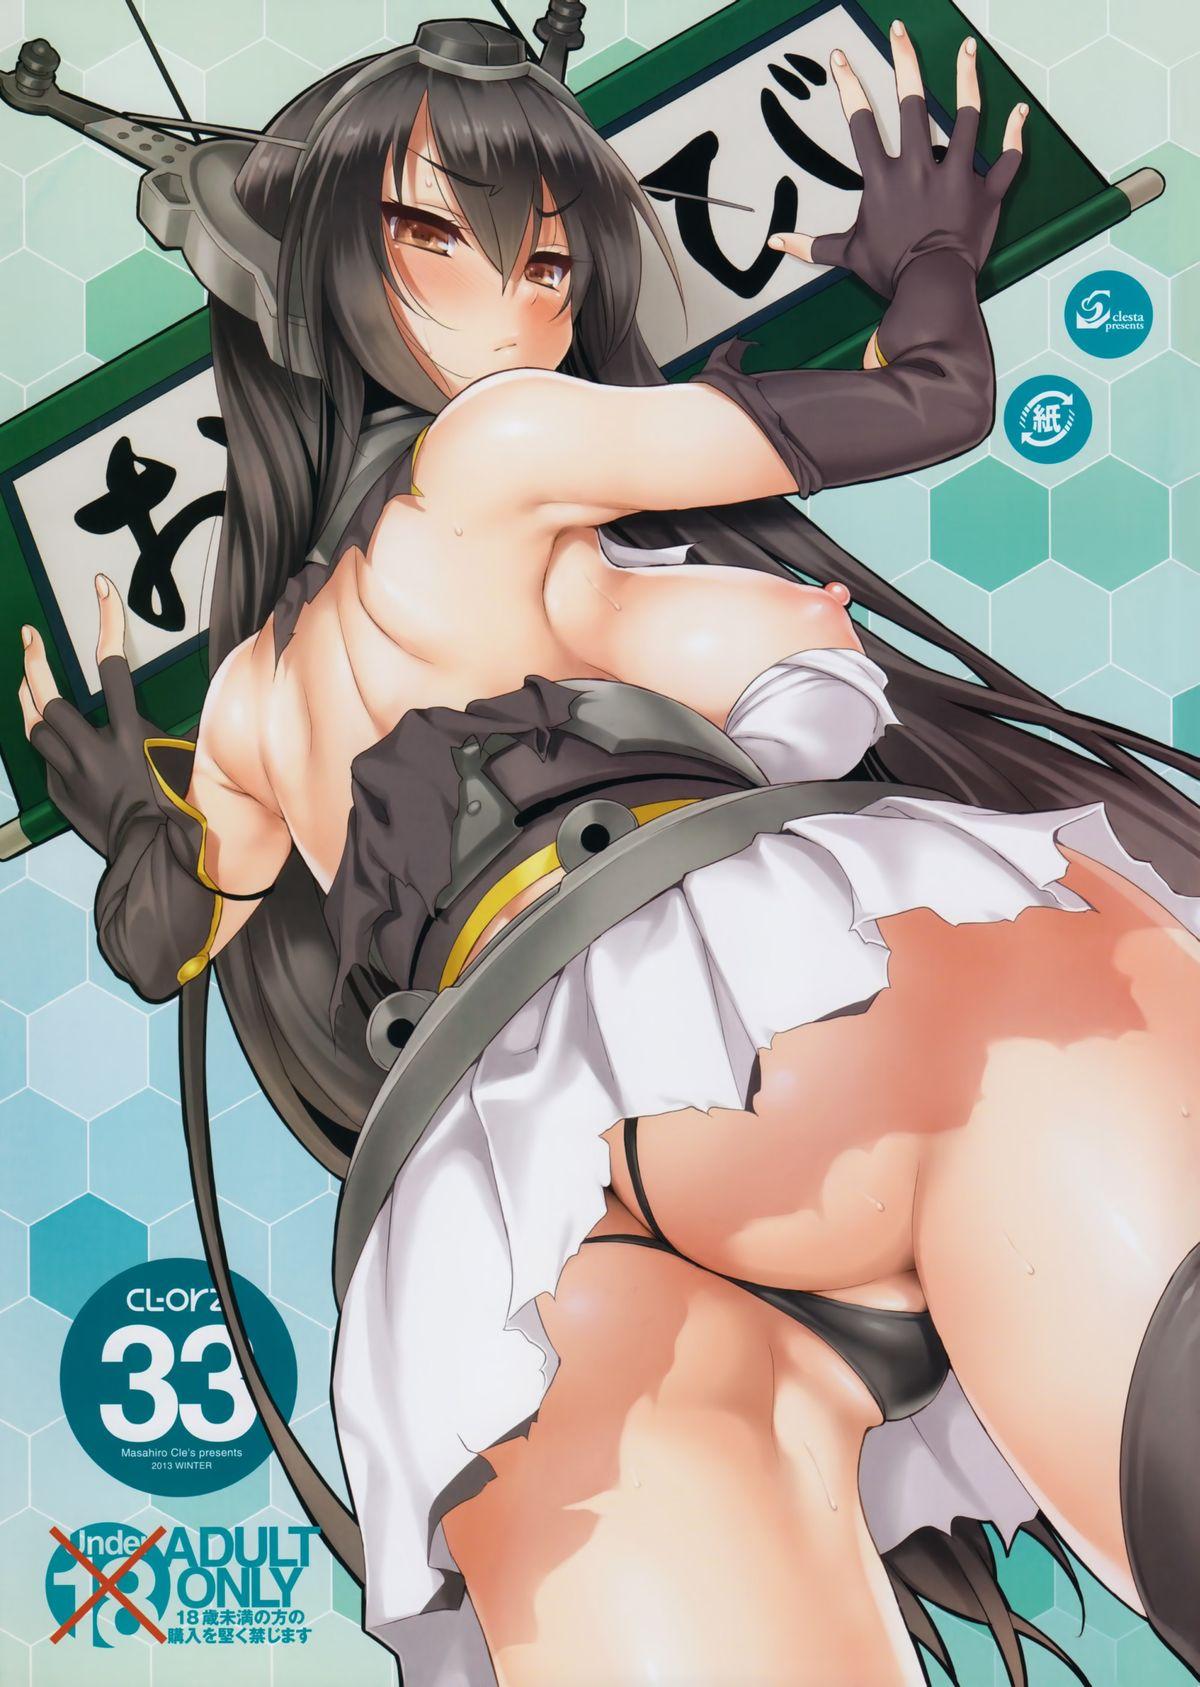 Cunt CL-orz 33 - Kantai collection Pov Blow Job - Picture 1